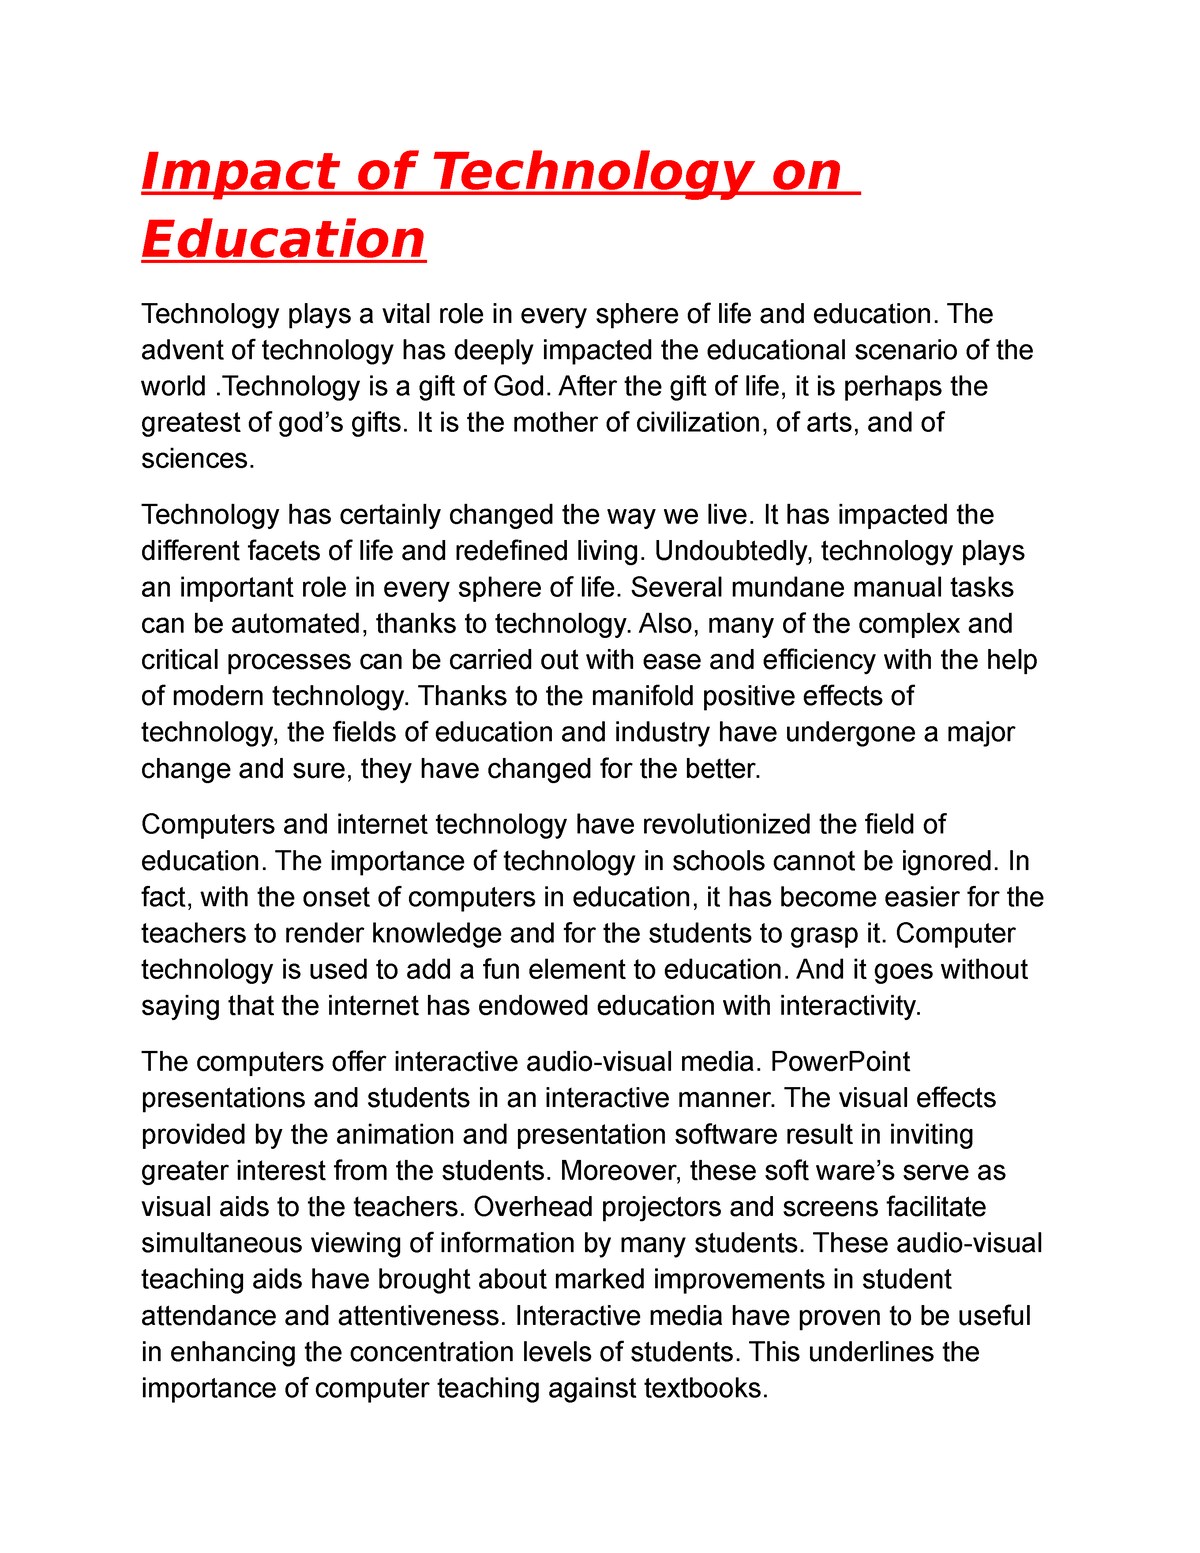 the impact of technology on education essay 300 words